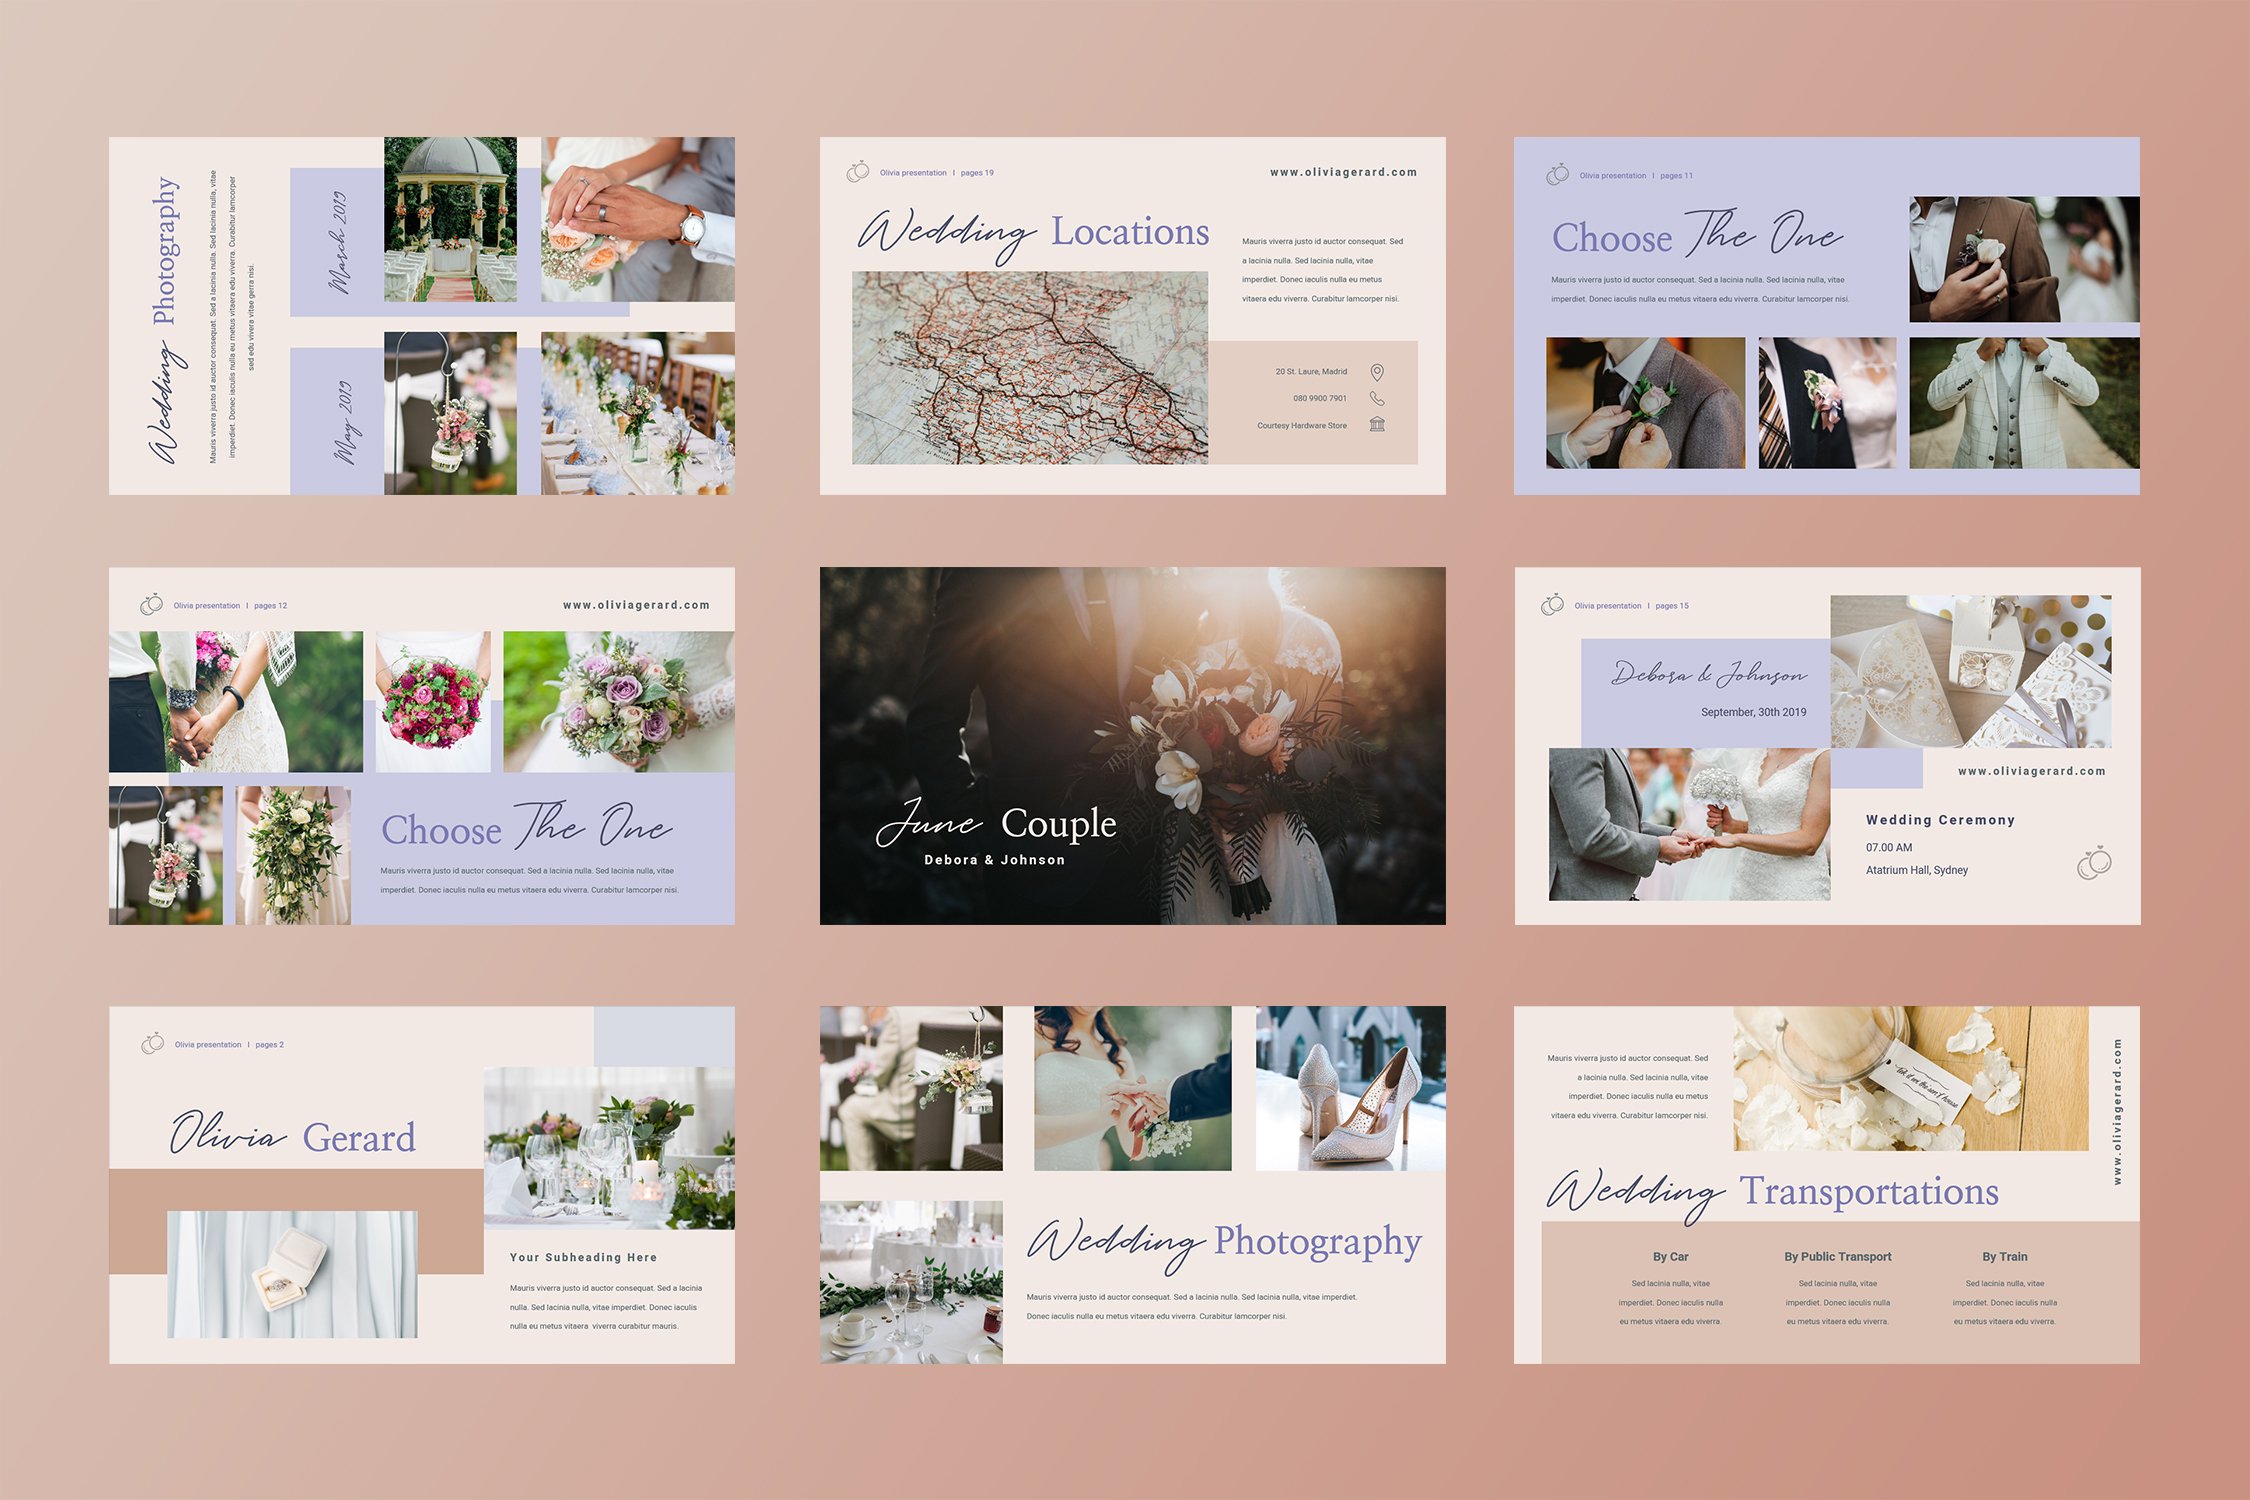 Cool design template with cute accents.